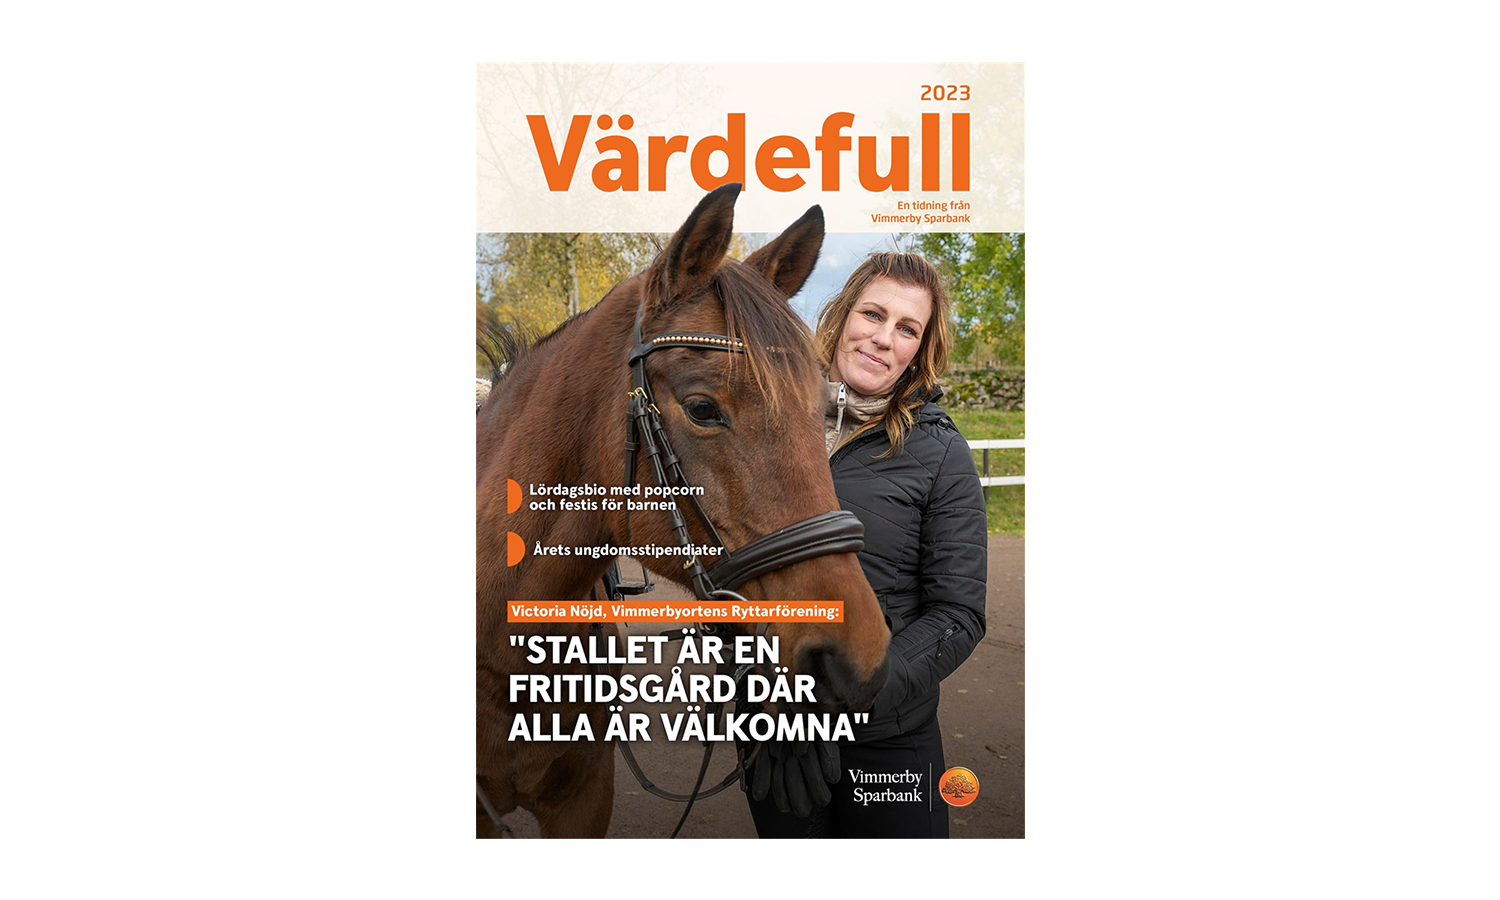 Magazine cover of a woman with a horse